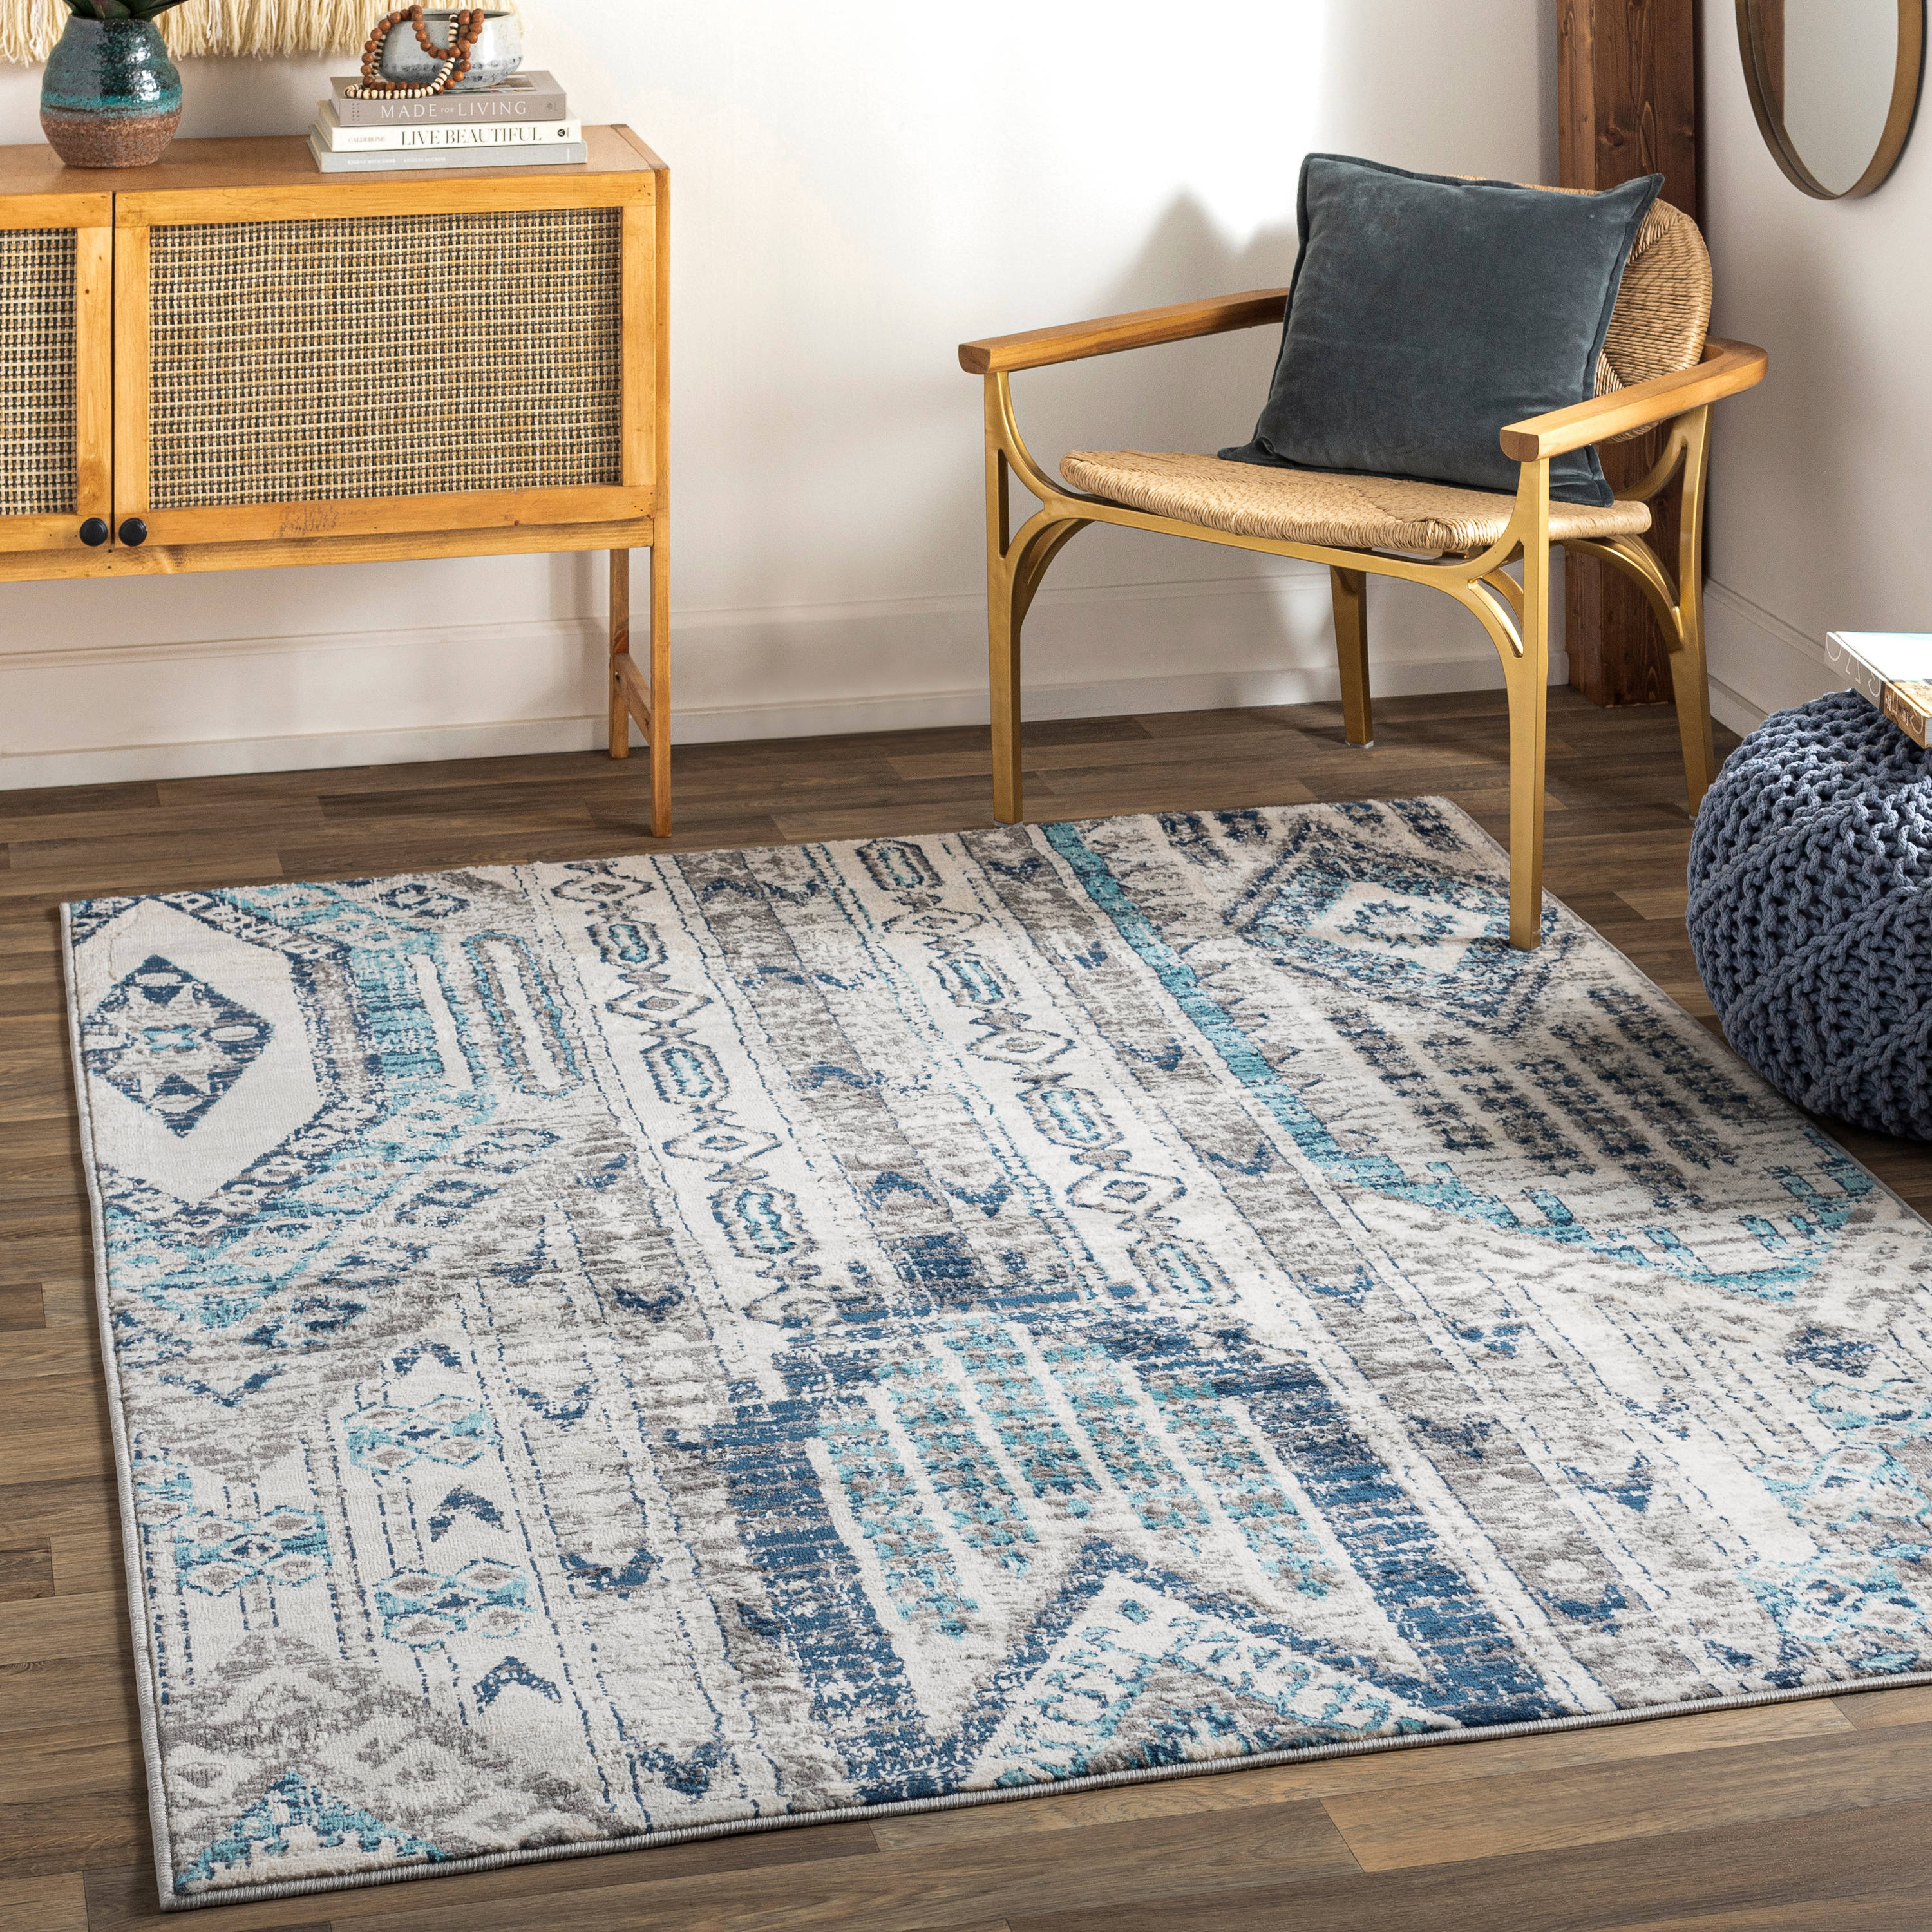 Portland 1290 L Grey Blue Funky Geometric Budget Rug in various sizes and runner 